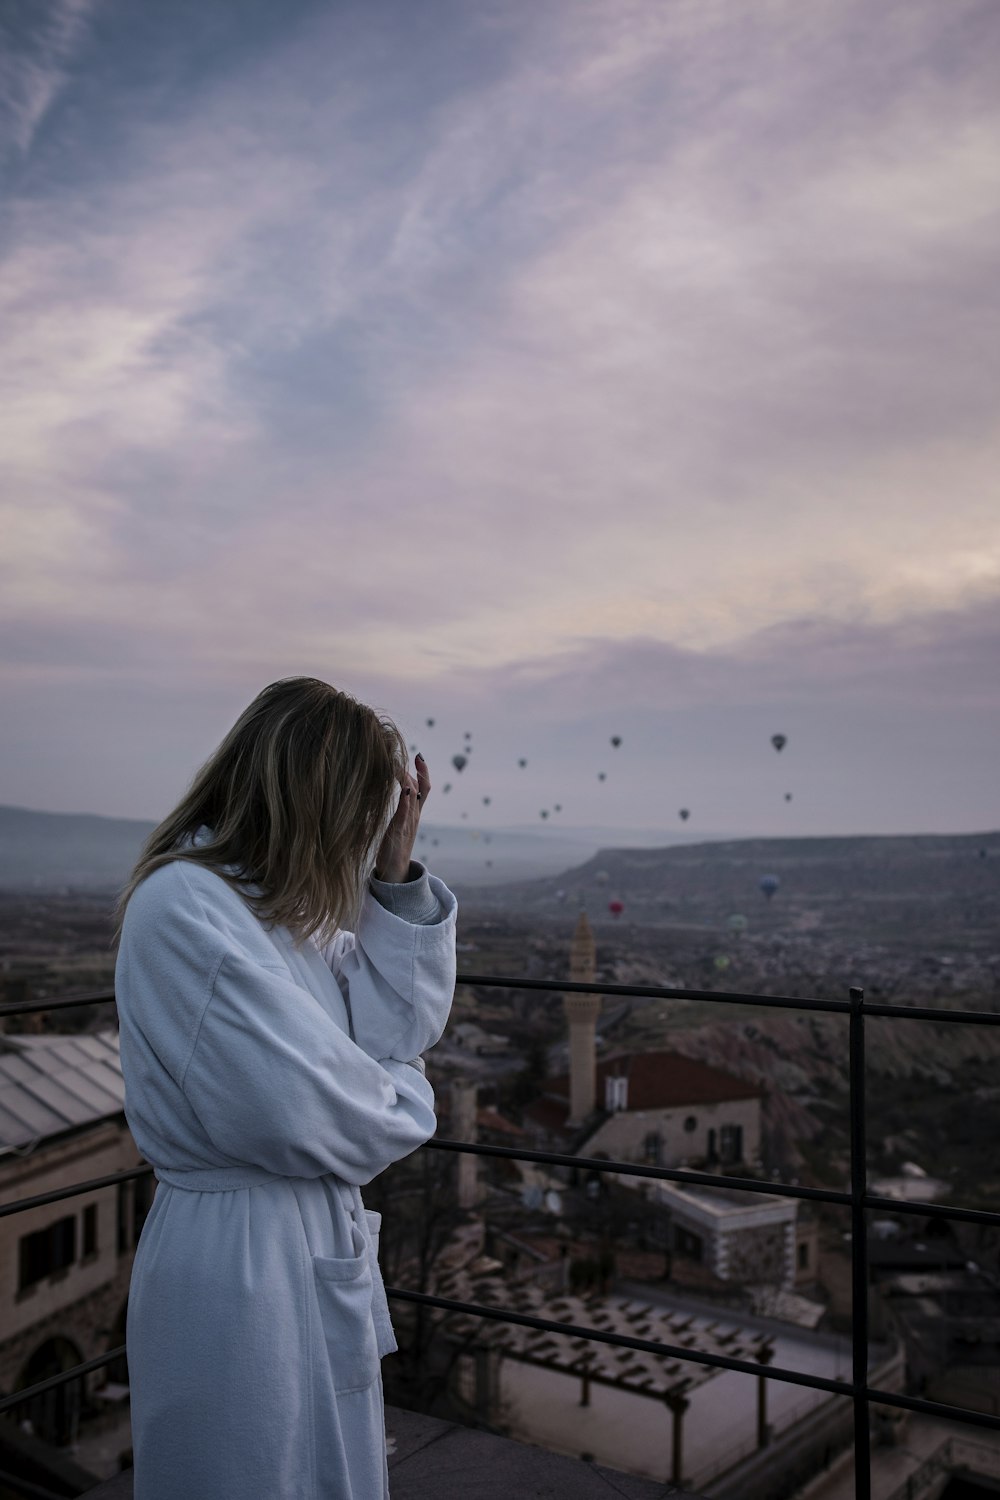 a woman in a bathrobe standing on a balcony